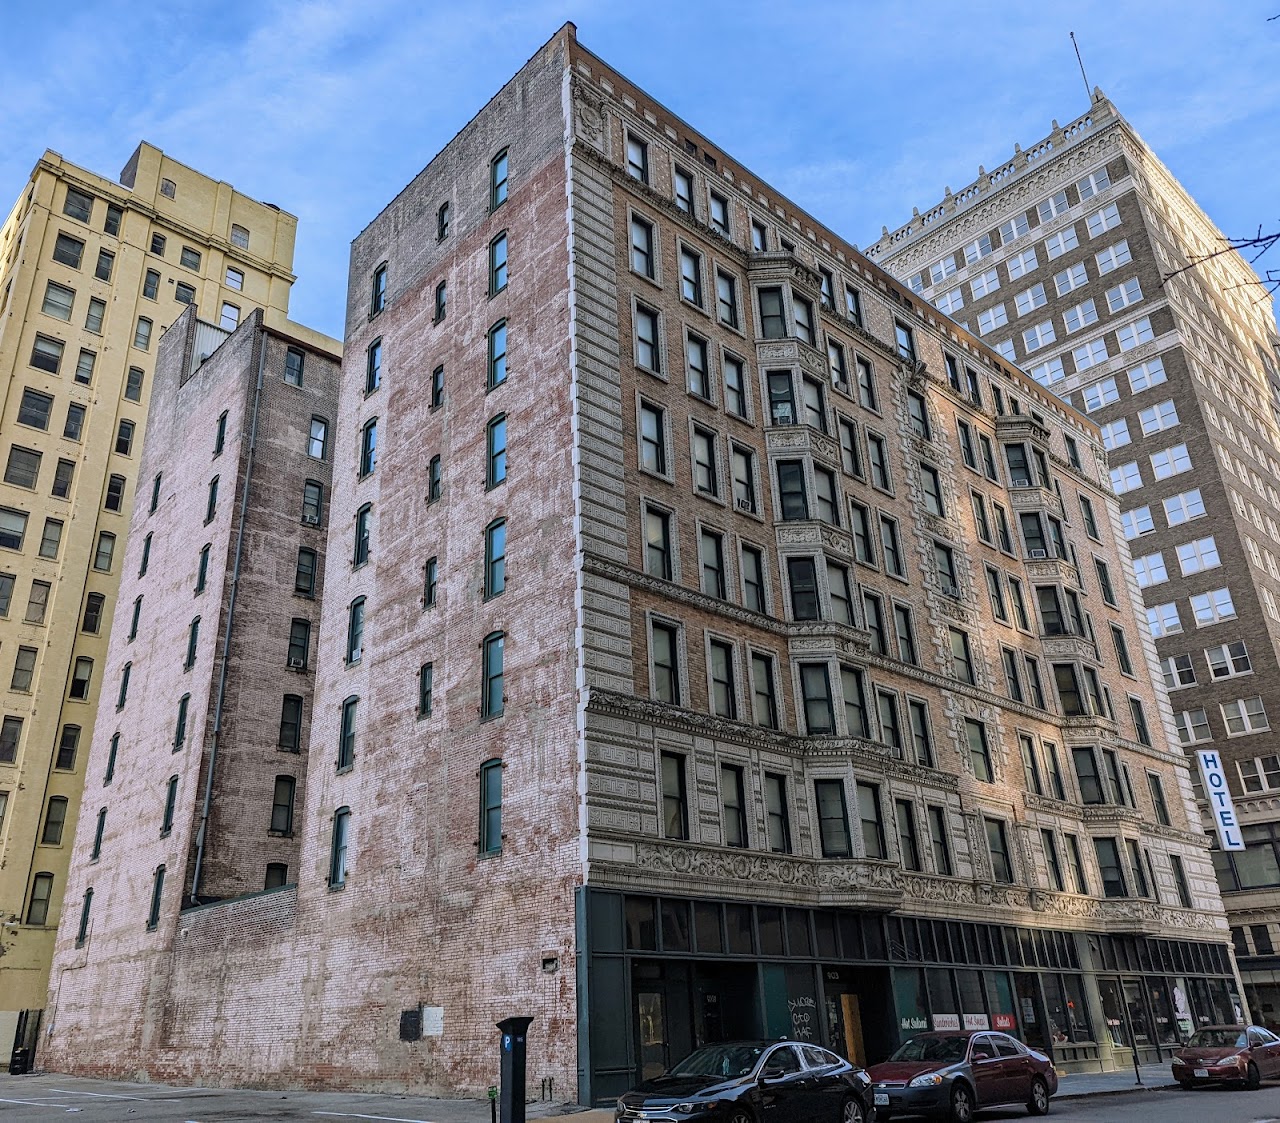 Photo of MARK TWAIN HOTEL. Affordable housing located at 205 N NINTH ST ST LOUIS, MO 63101